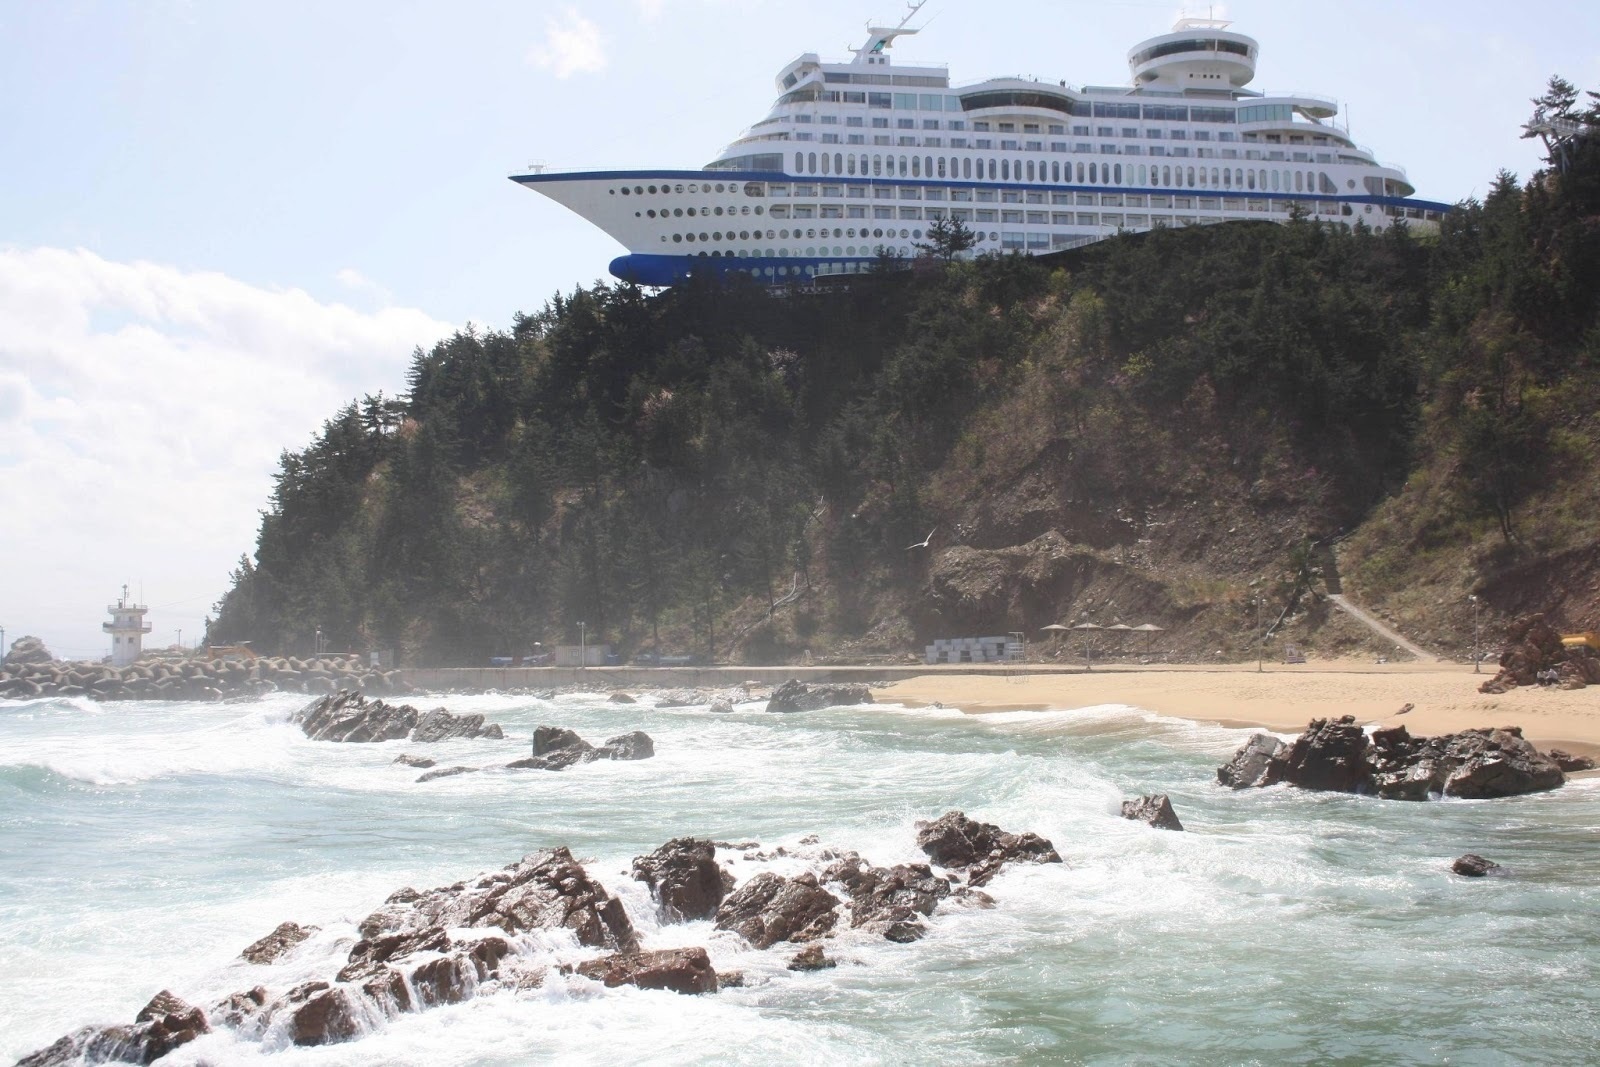 The floating cruise ship is actually a speciality resort hotel in South Korea.